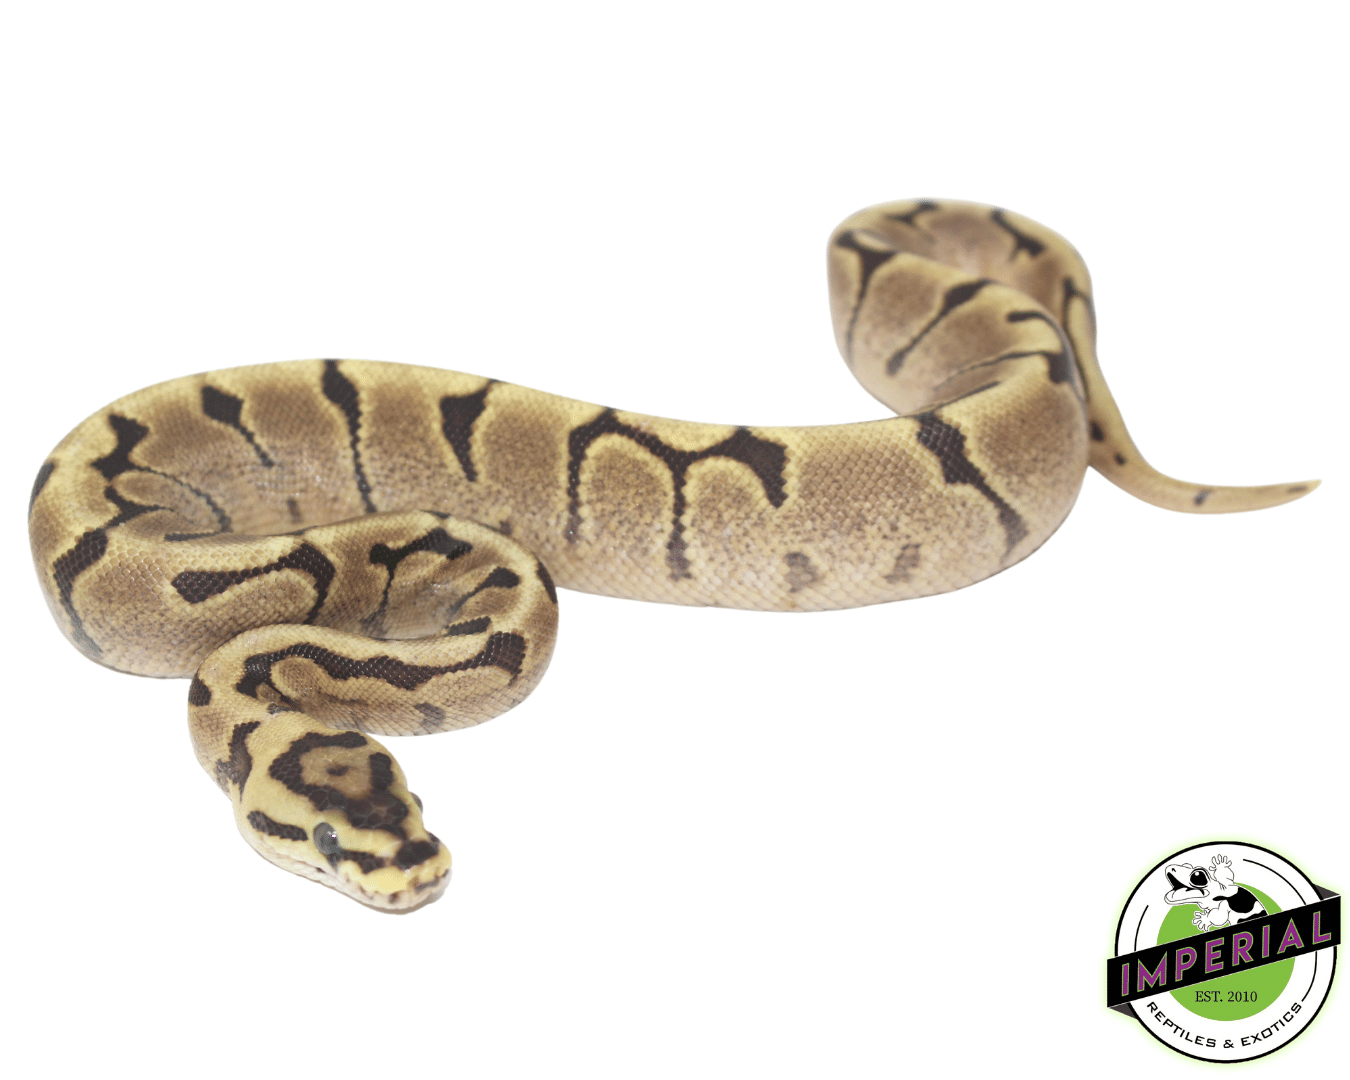 Mojave woma ball python for sale, buy reptiles online